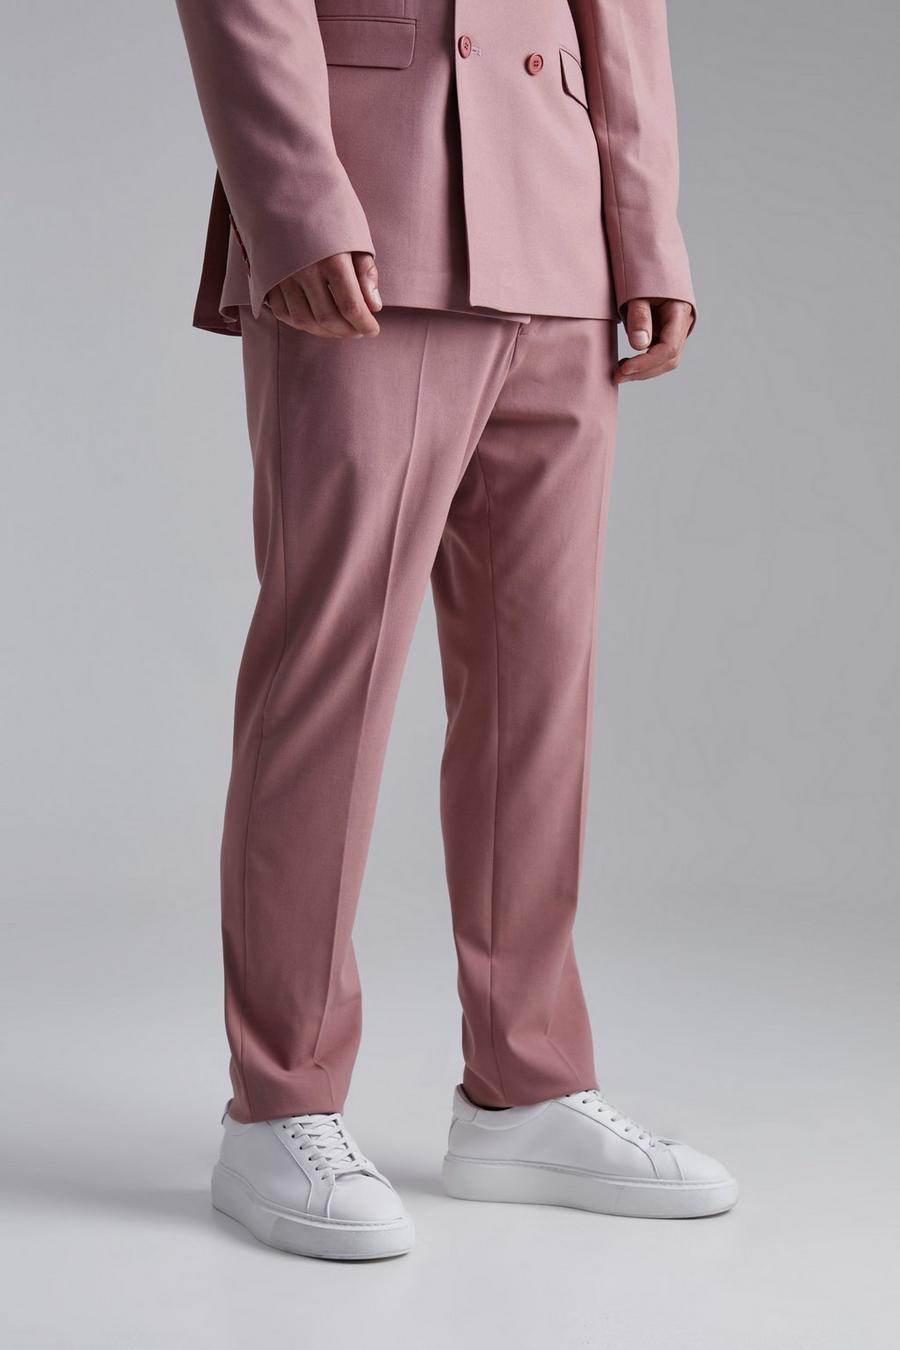 Light pink rose Tall Slim Suit Trousers